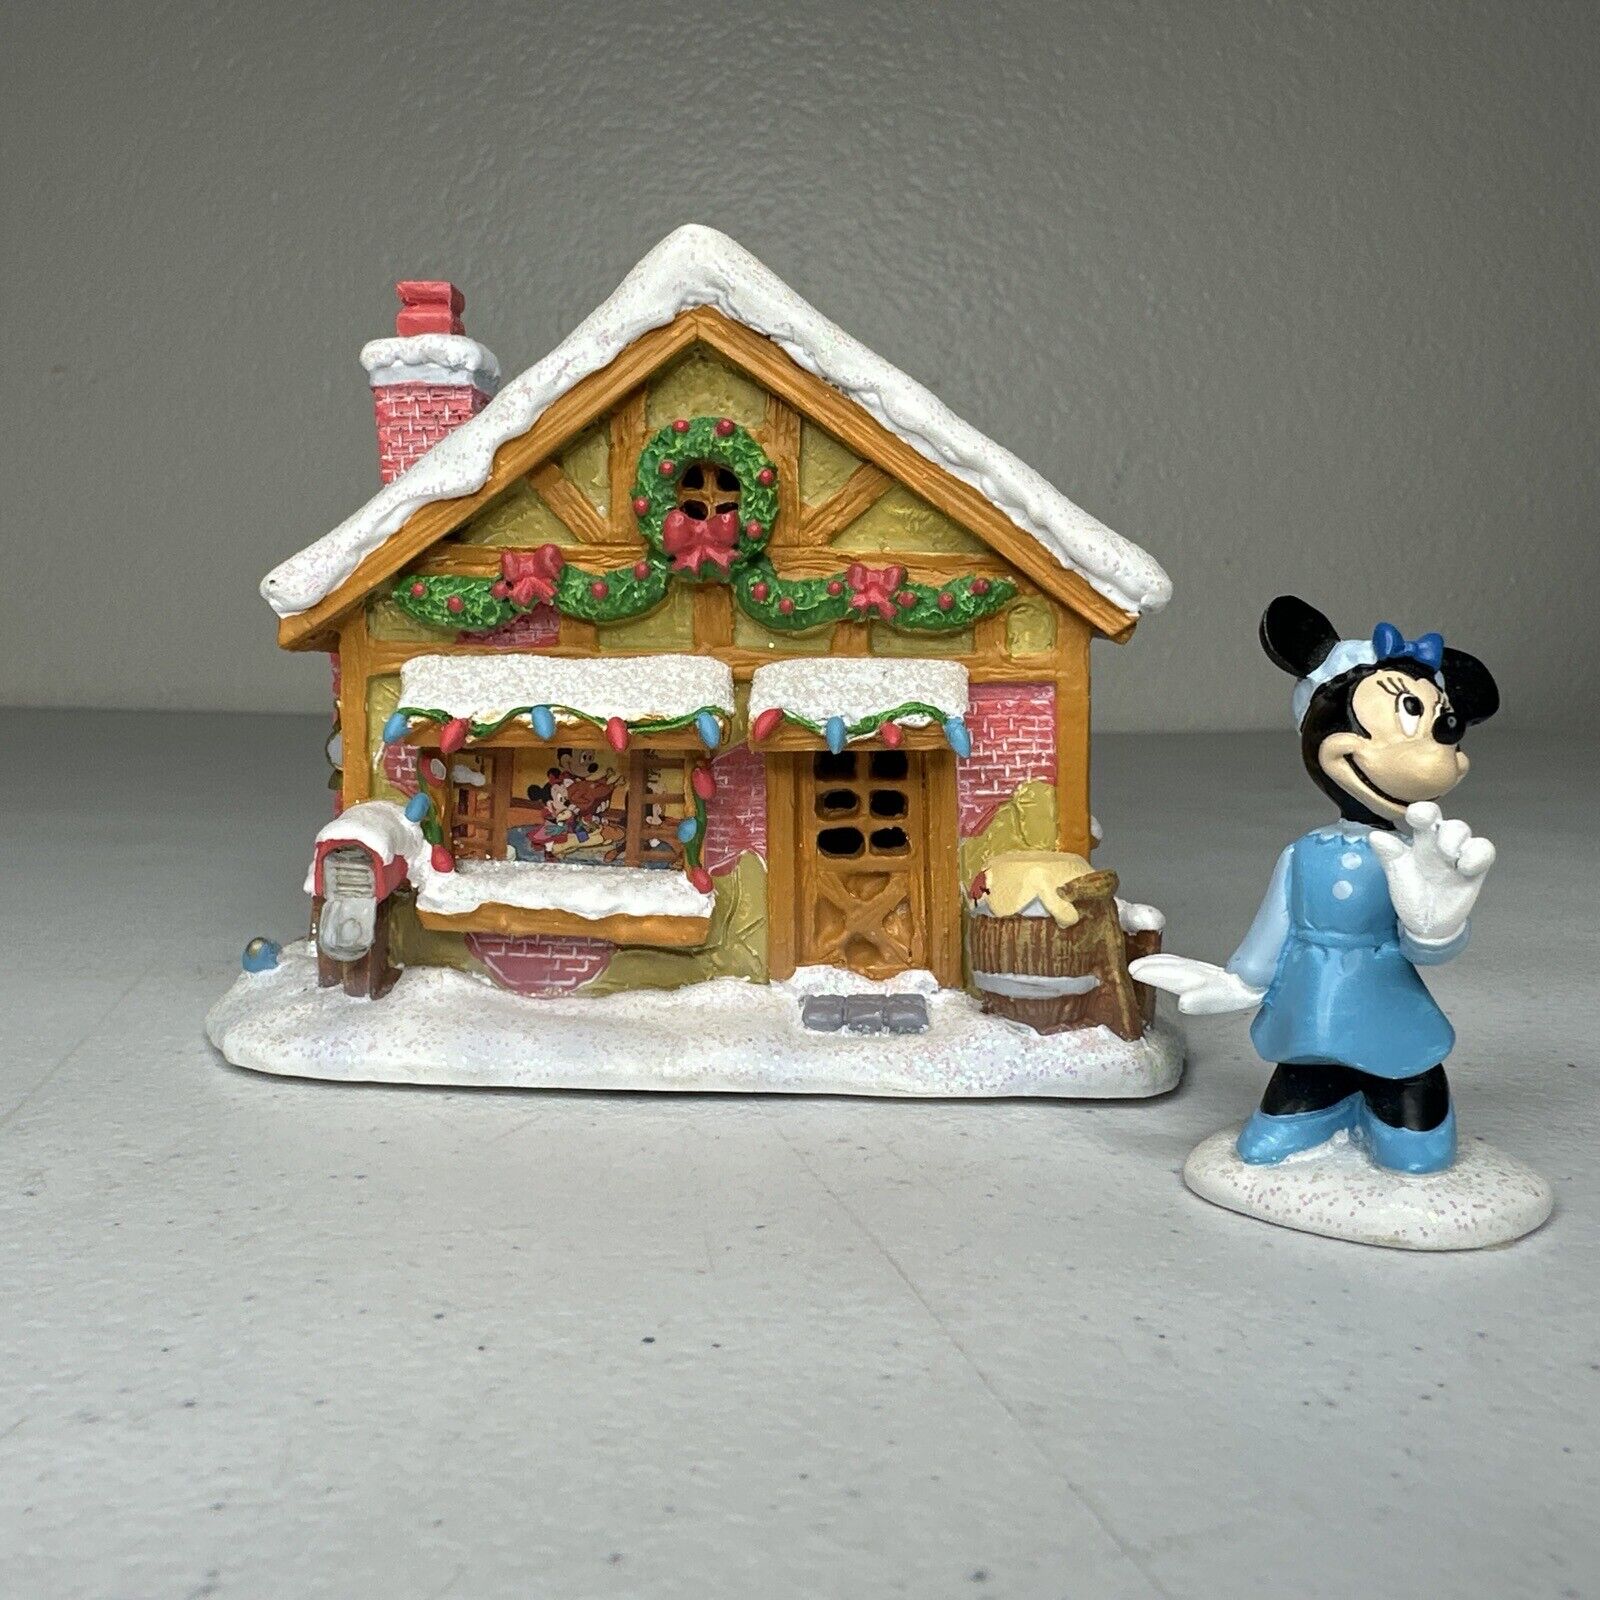 Disney Hawthorne Village Christmas Carol "Bob Cratchit's House" with Minnie Figurine - Collectible Holiday Decoration - TreasuTiques